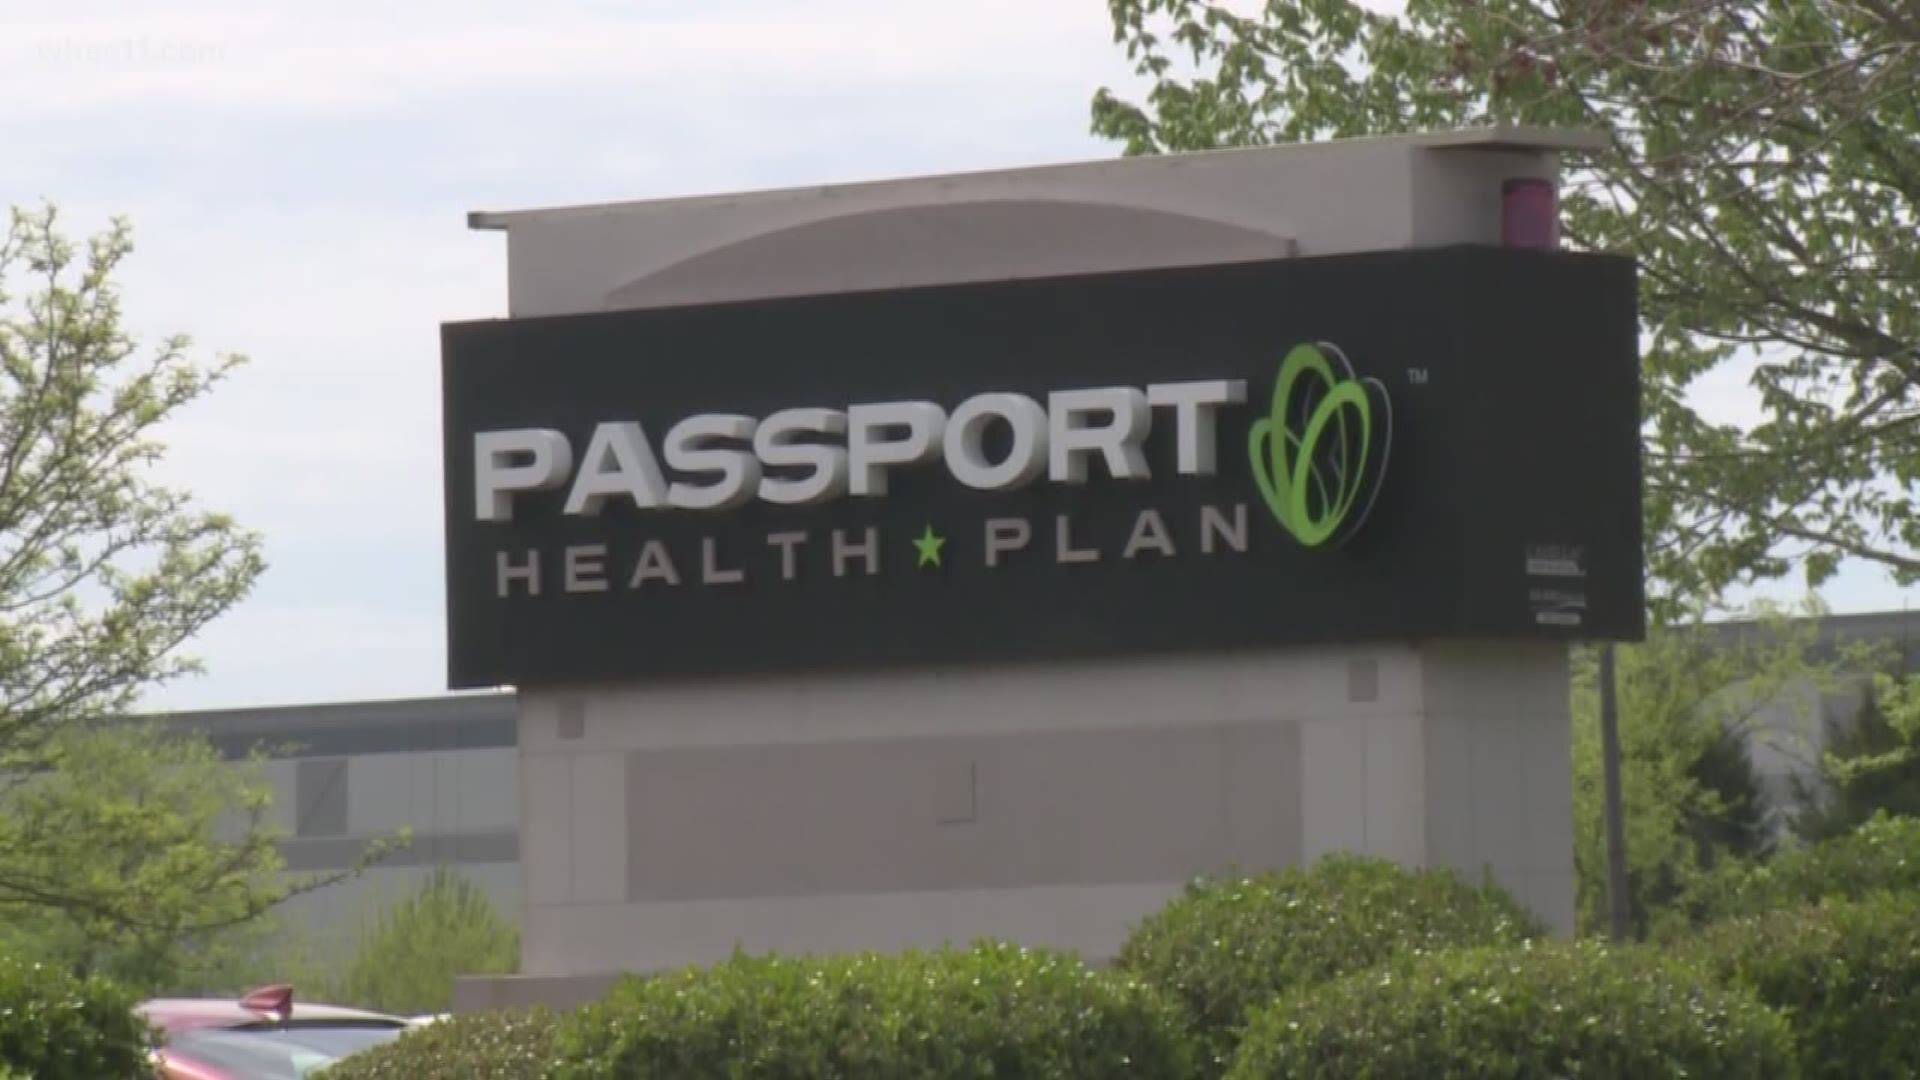 Passport Health  is now in the hands of a for-profit organization.